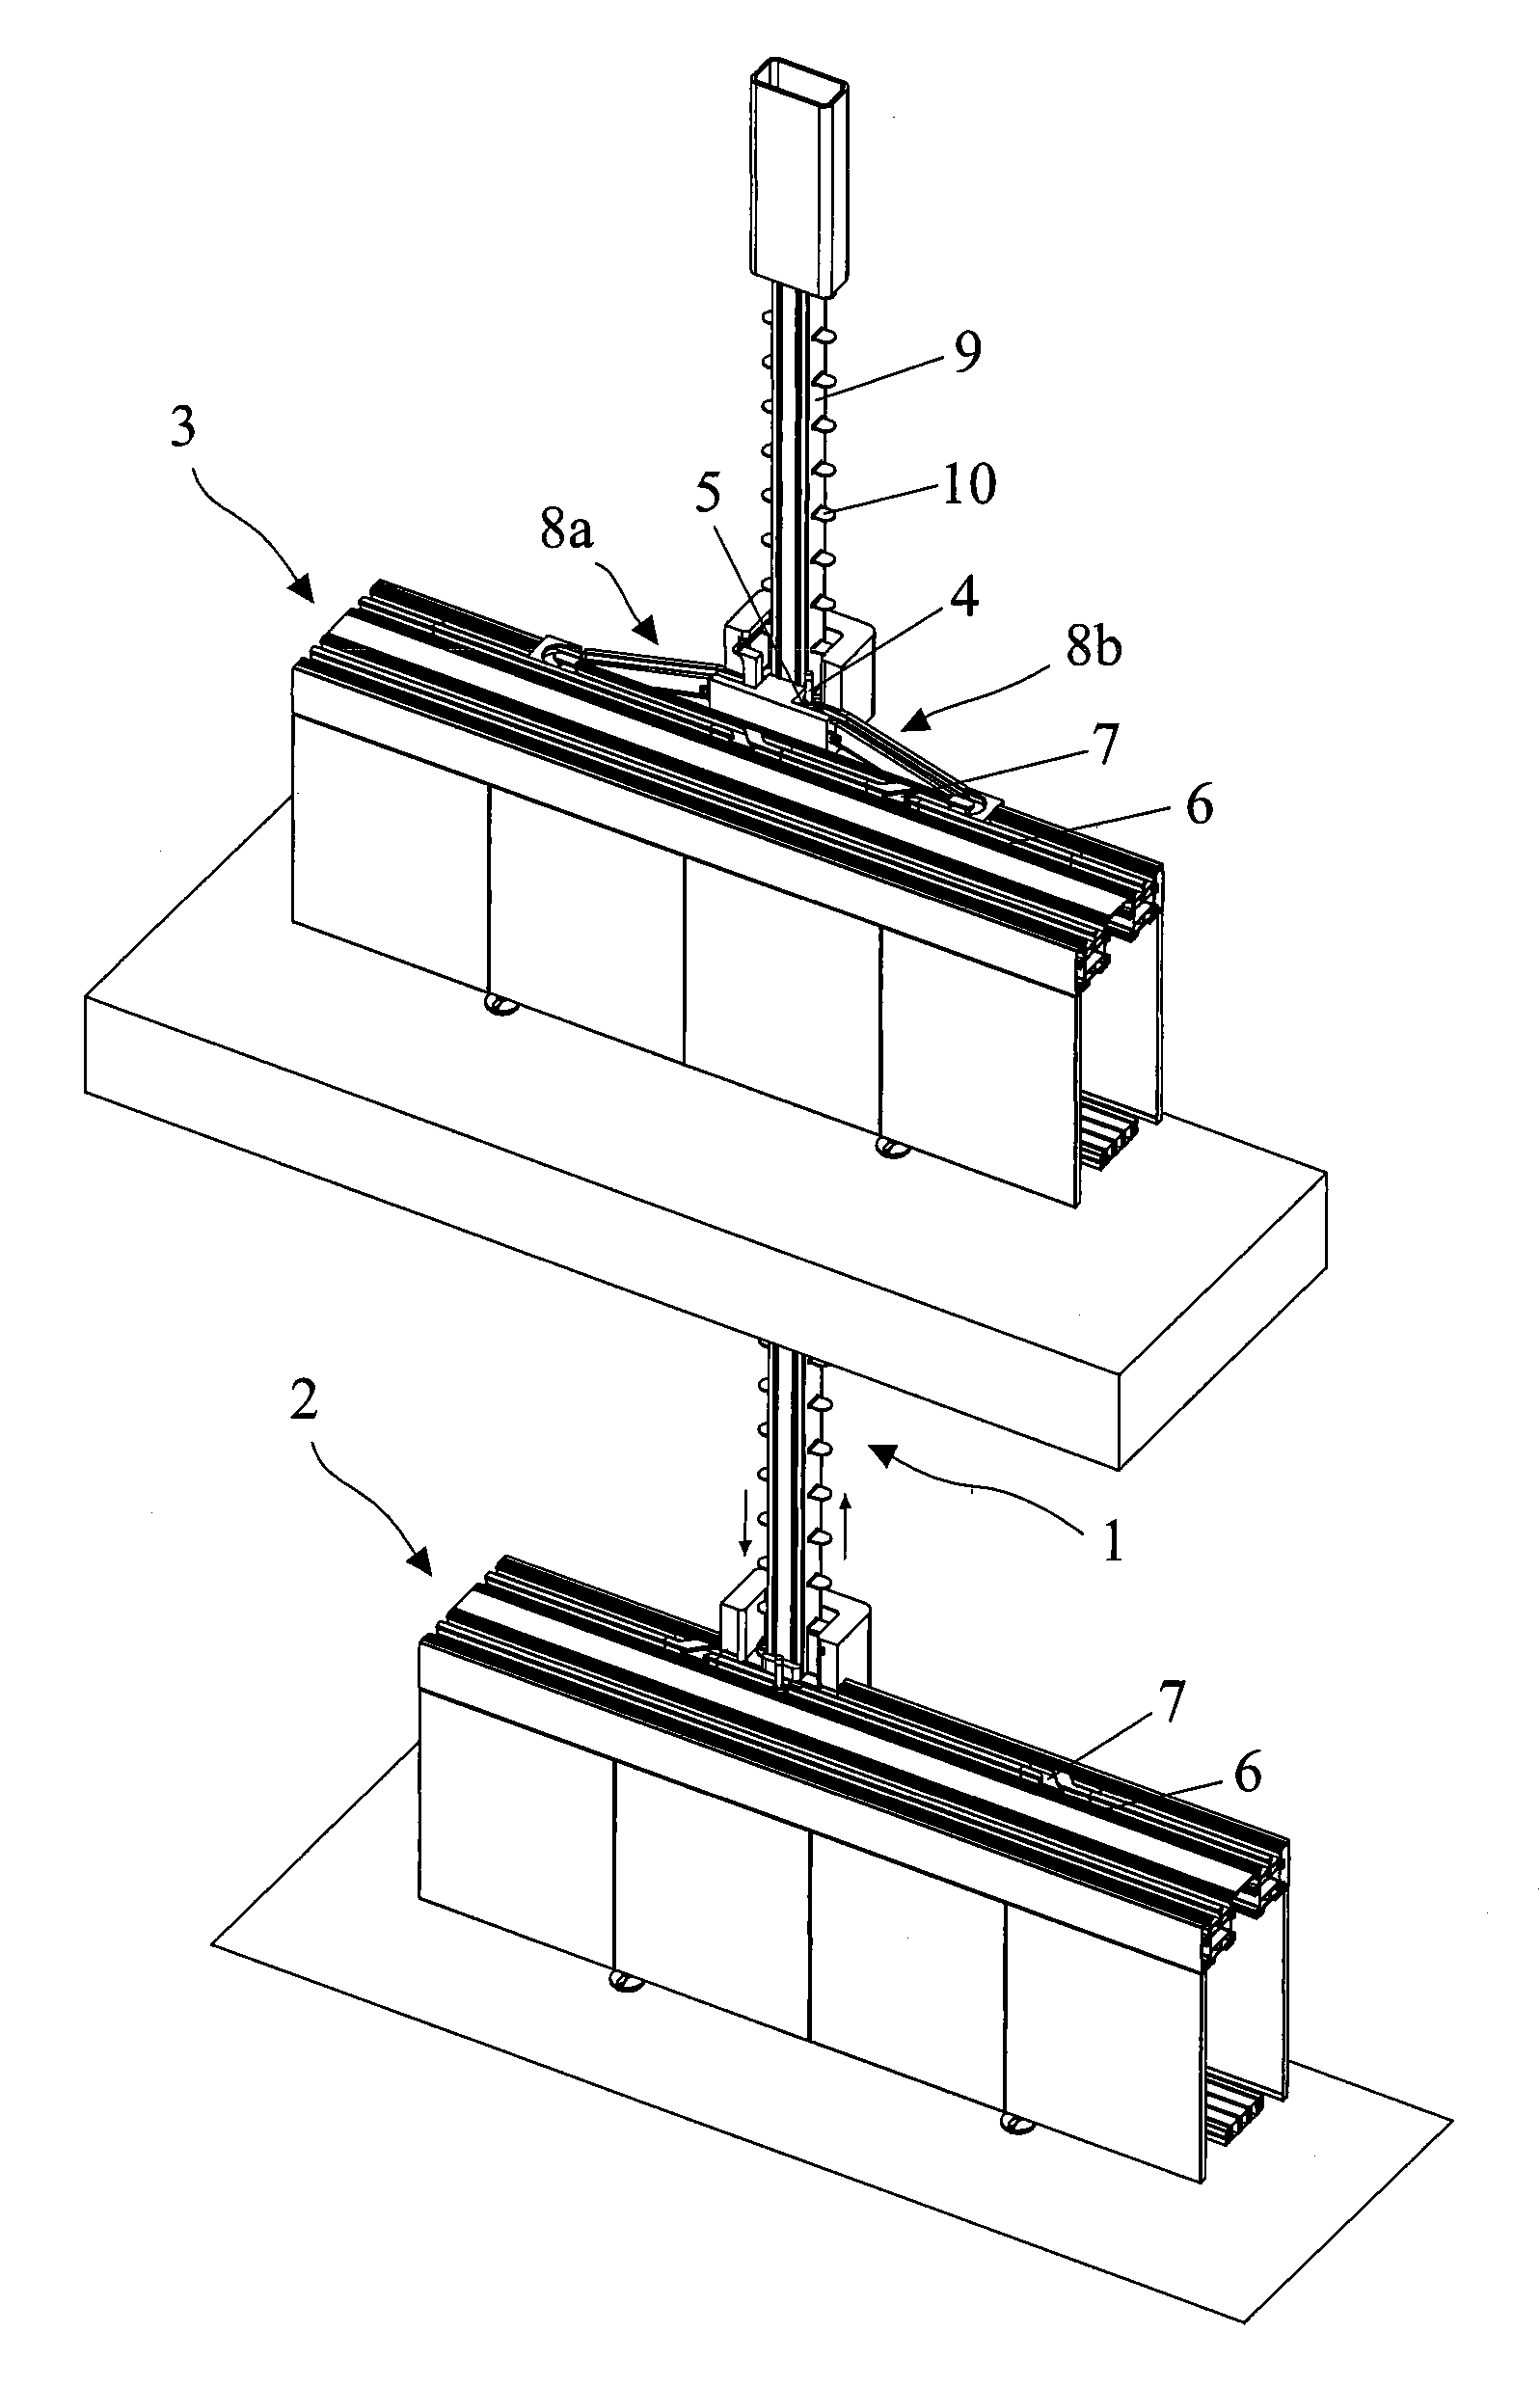 Apparatus for transferring specimens of biological material between laboratory automation systems placed at different heights